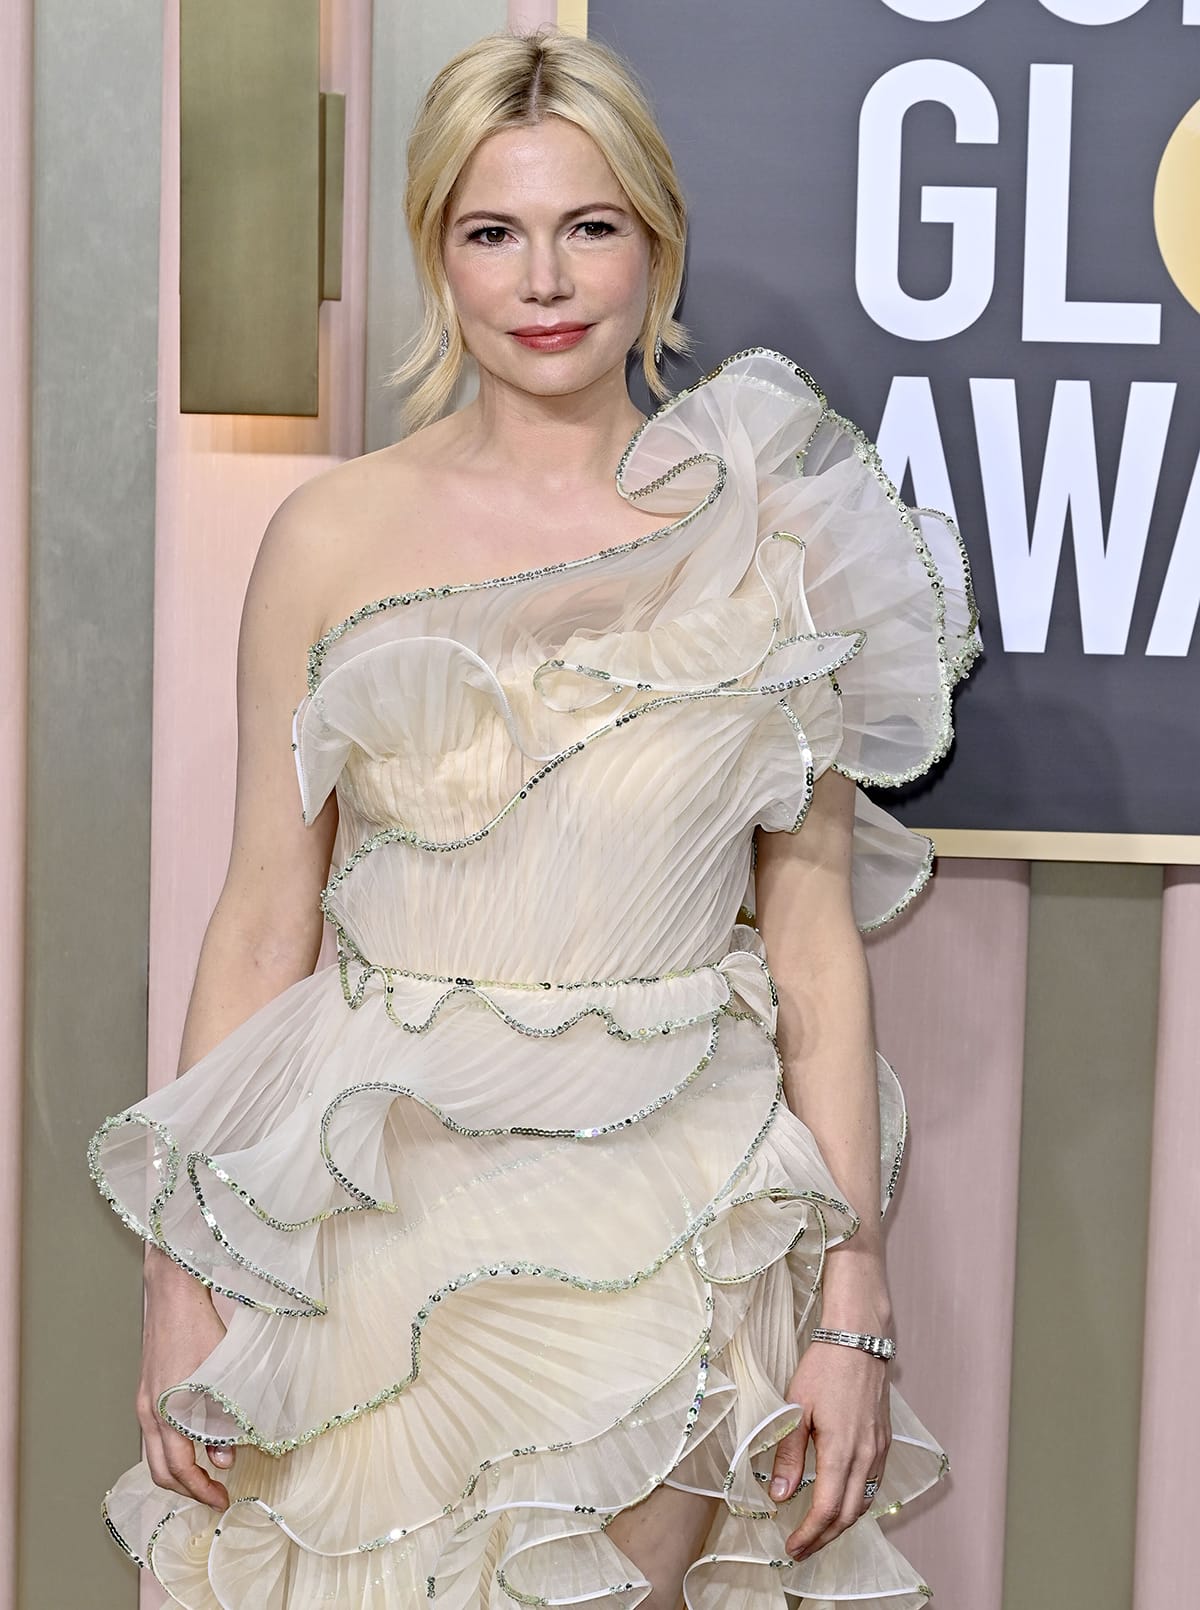 Michelle Williams keeps her beauty look romantic with an elegant updo and rosy makeup using Chanel cosmetics